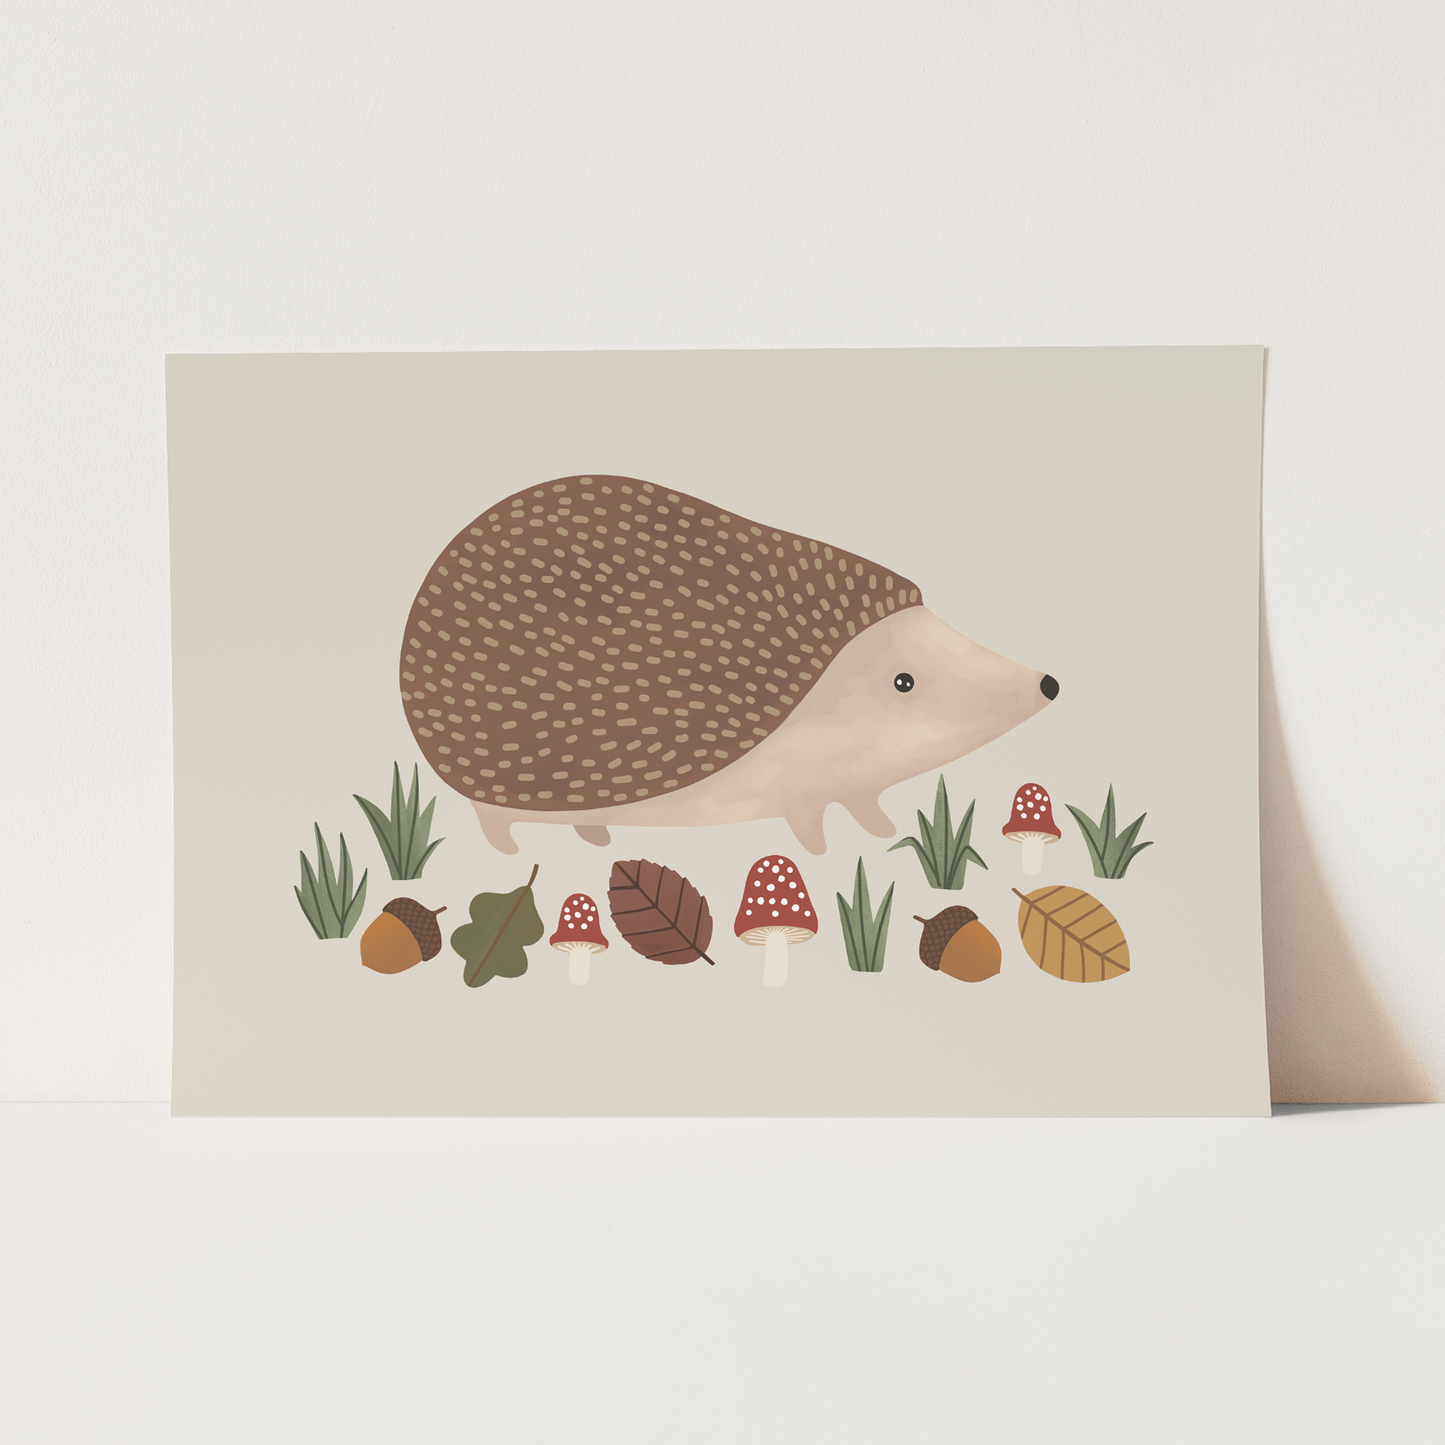 Hedgehog Art Print In Stone by Kid of the Village (6 Sizes Available)